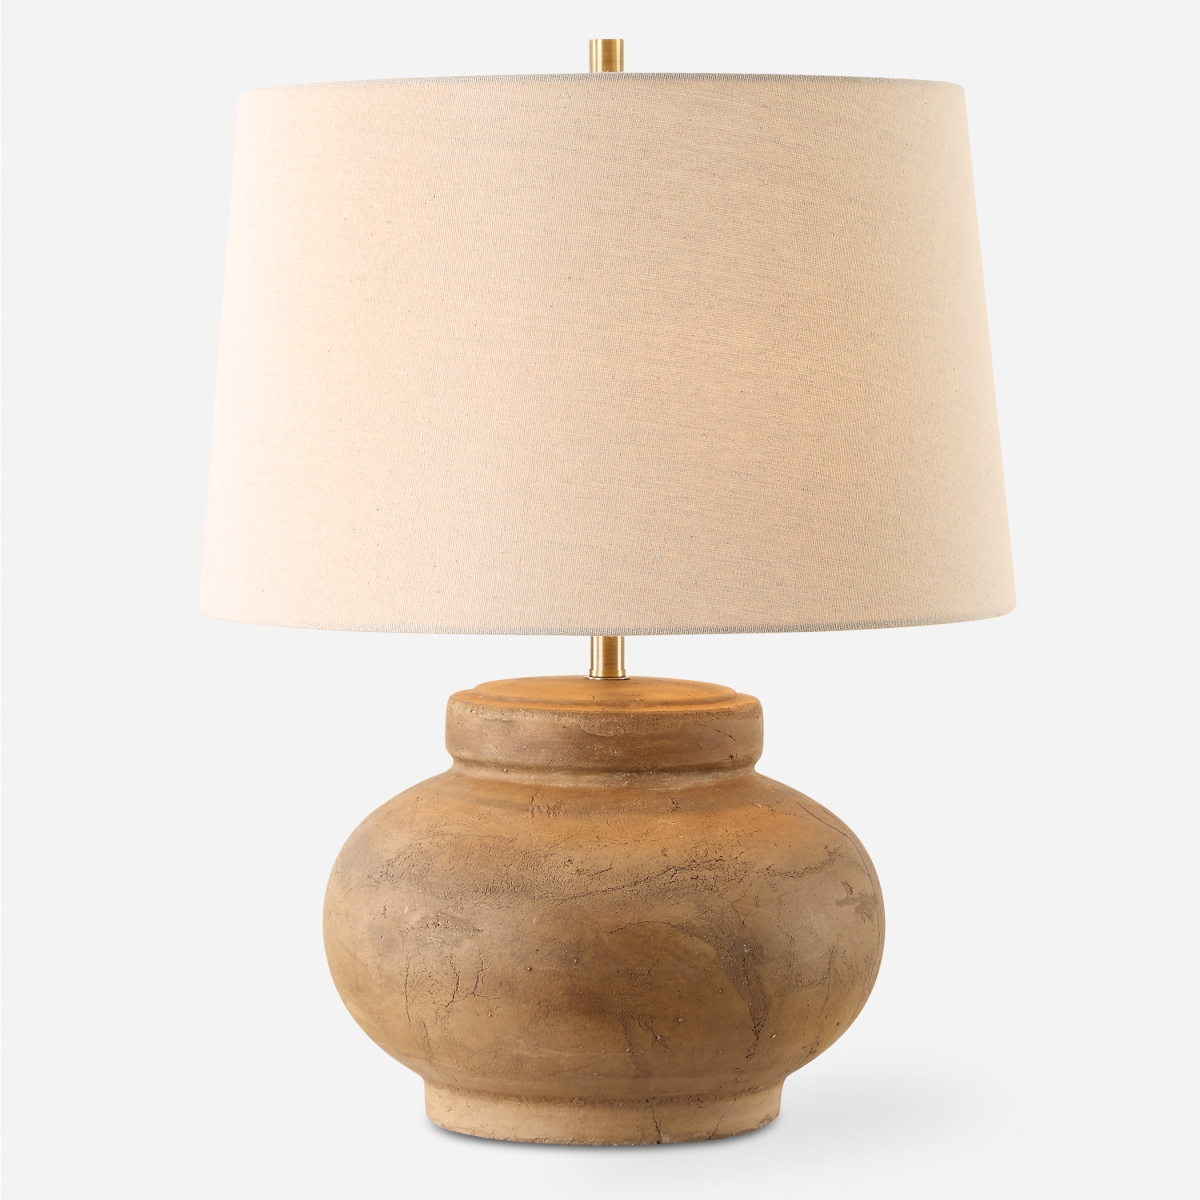 Picture of Uttermost 30346-1 Urbino Aged Terracotta Table Lamp